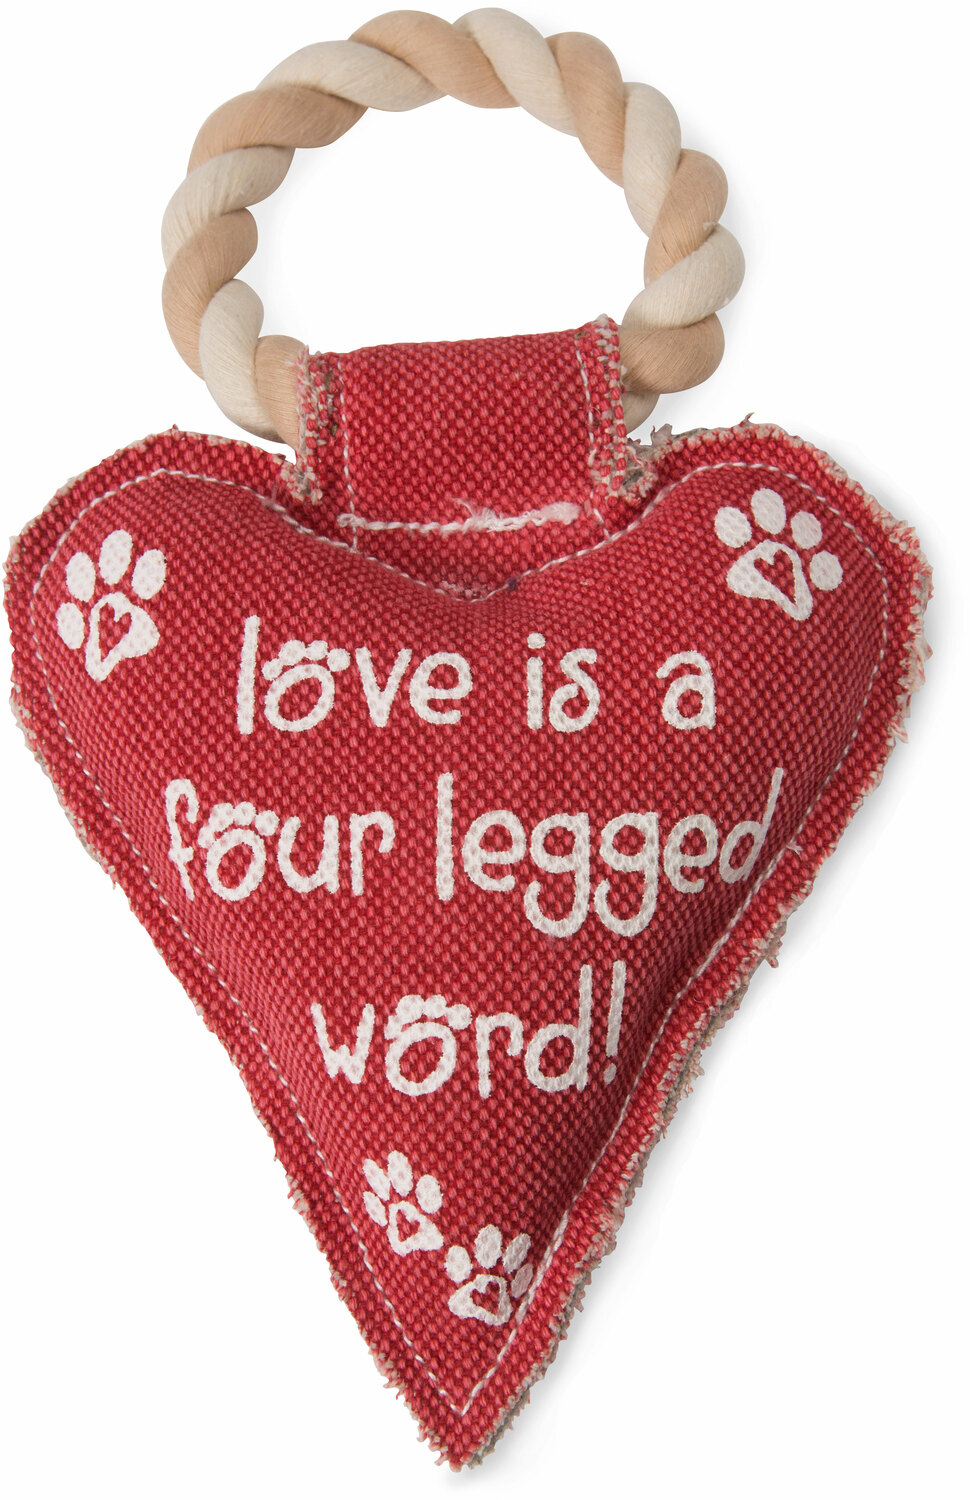 Heart Love by Pavilion's Pets - Love is a Four Legged Word Heart Shaped Sturdy Canvas Tug of War Dog Toy